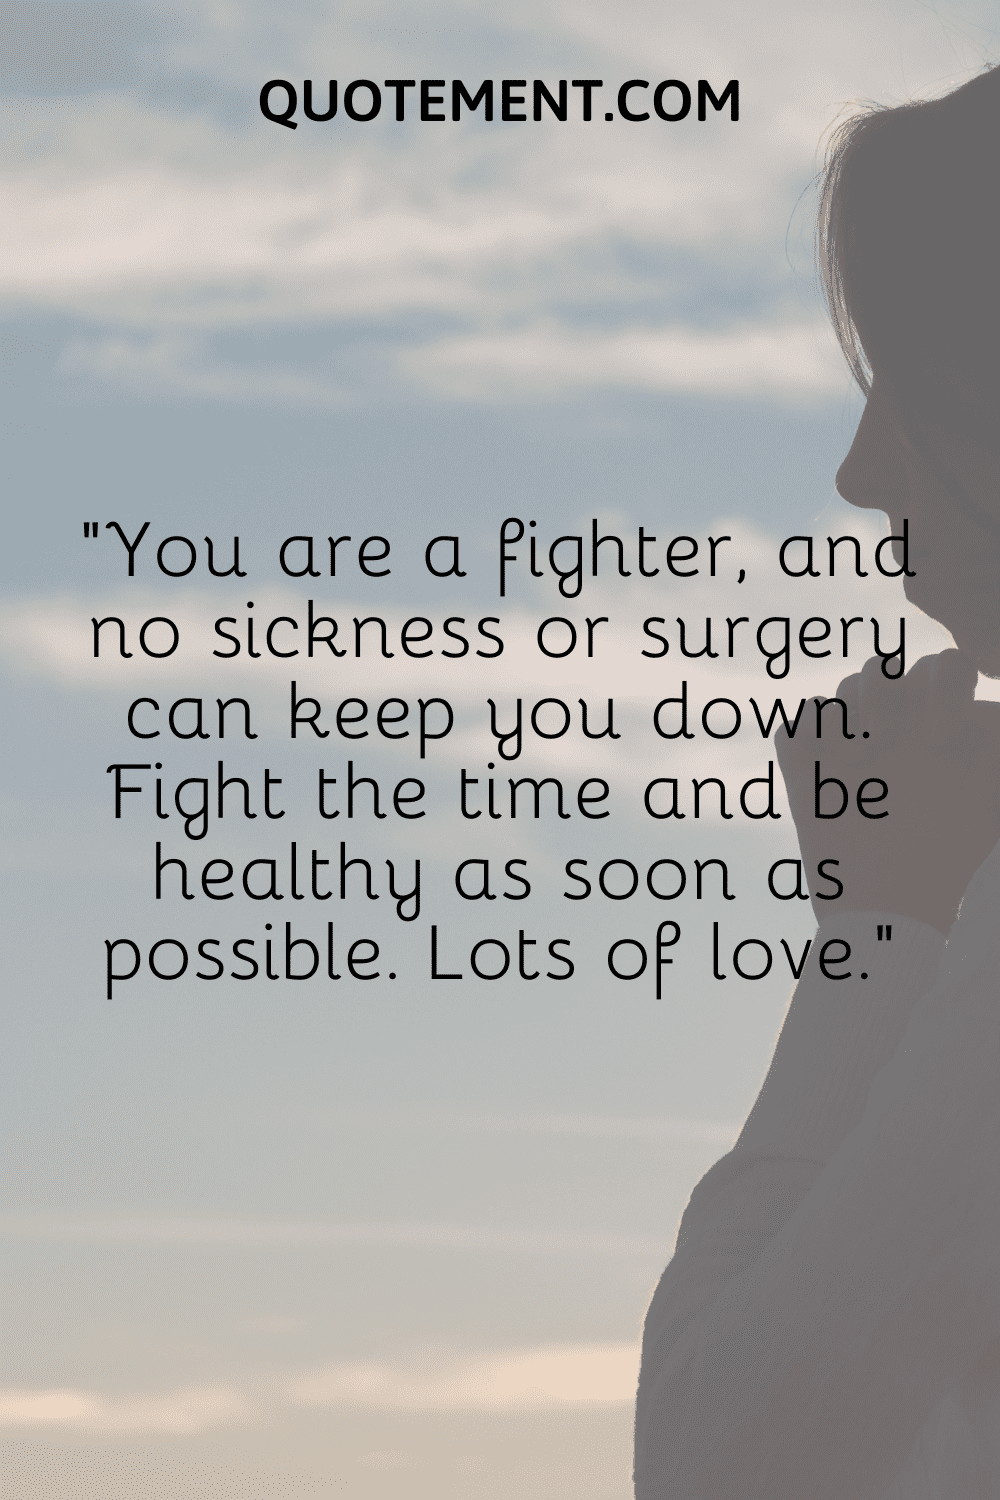 You are a fighter, and no sickness or surgery can keep you down